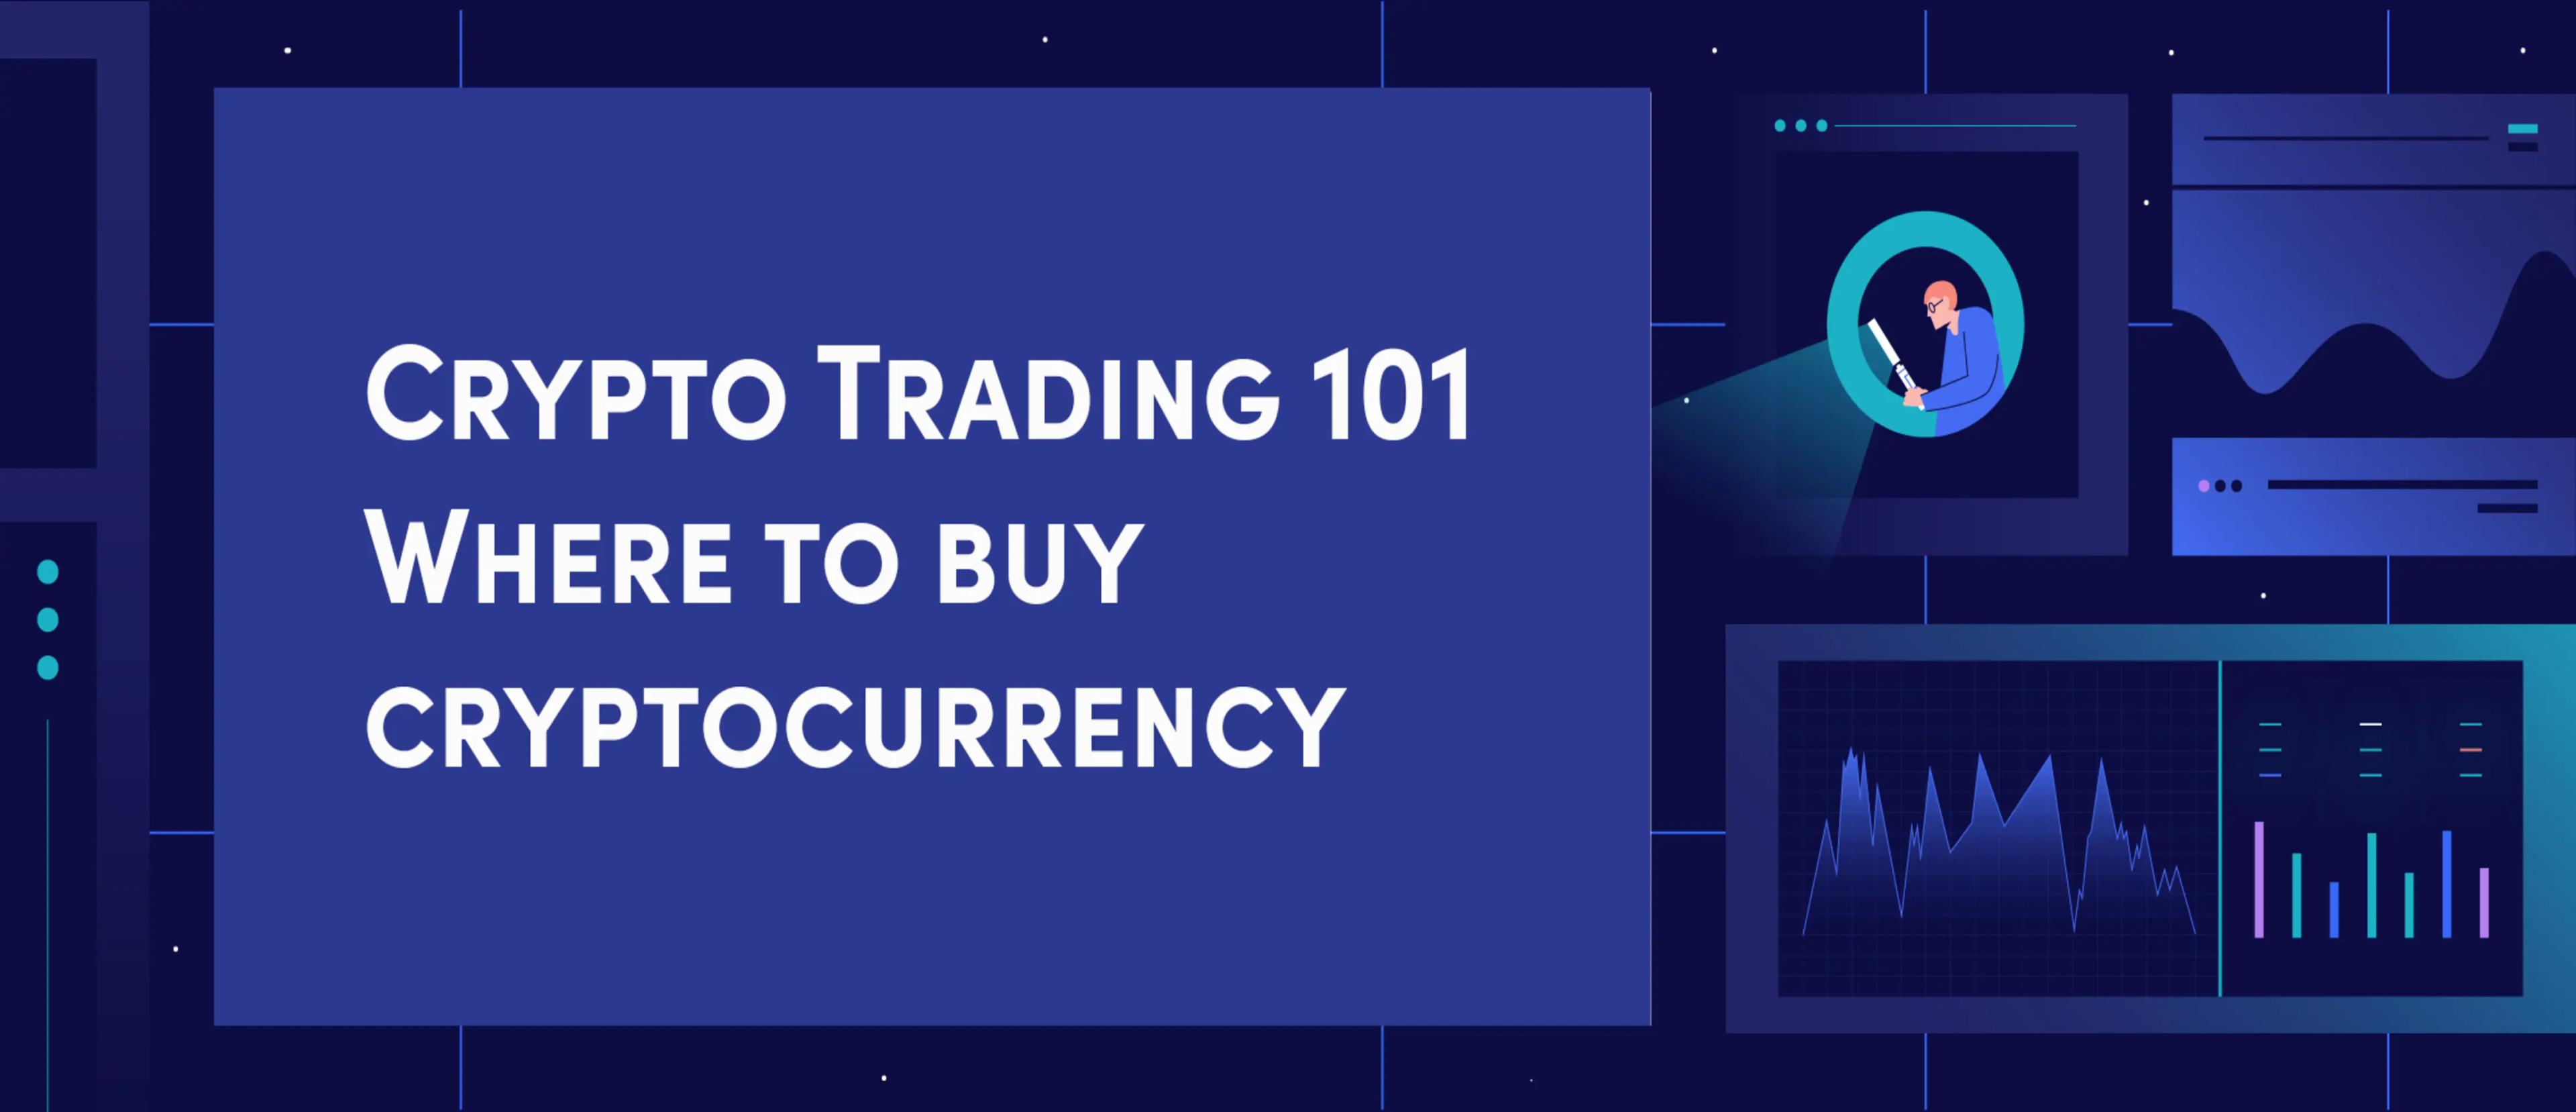 Crypto Trading 101 | Where To Buy Cryptocurrency